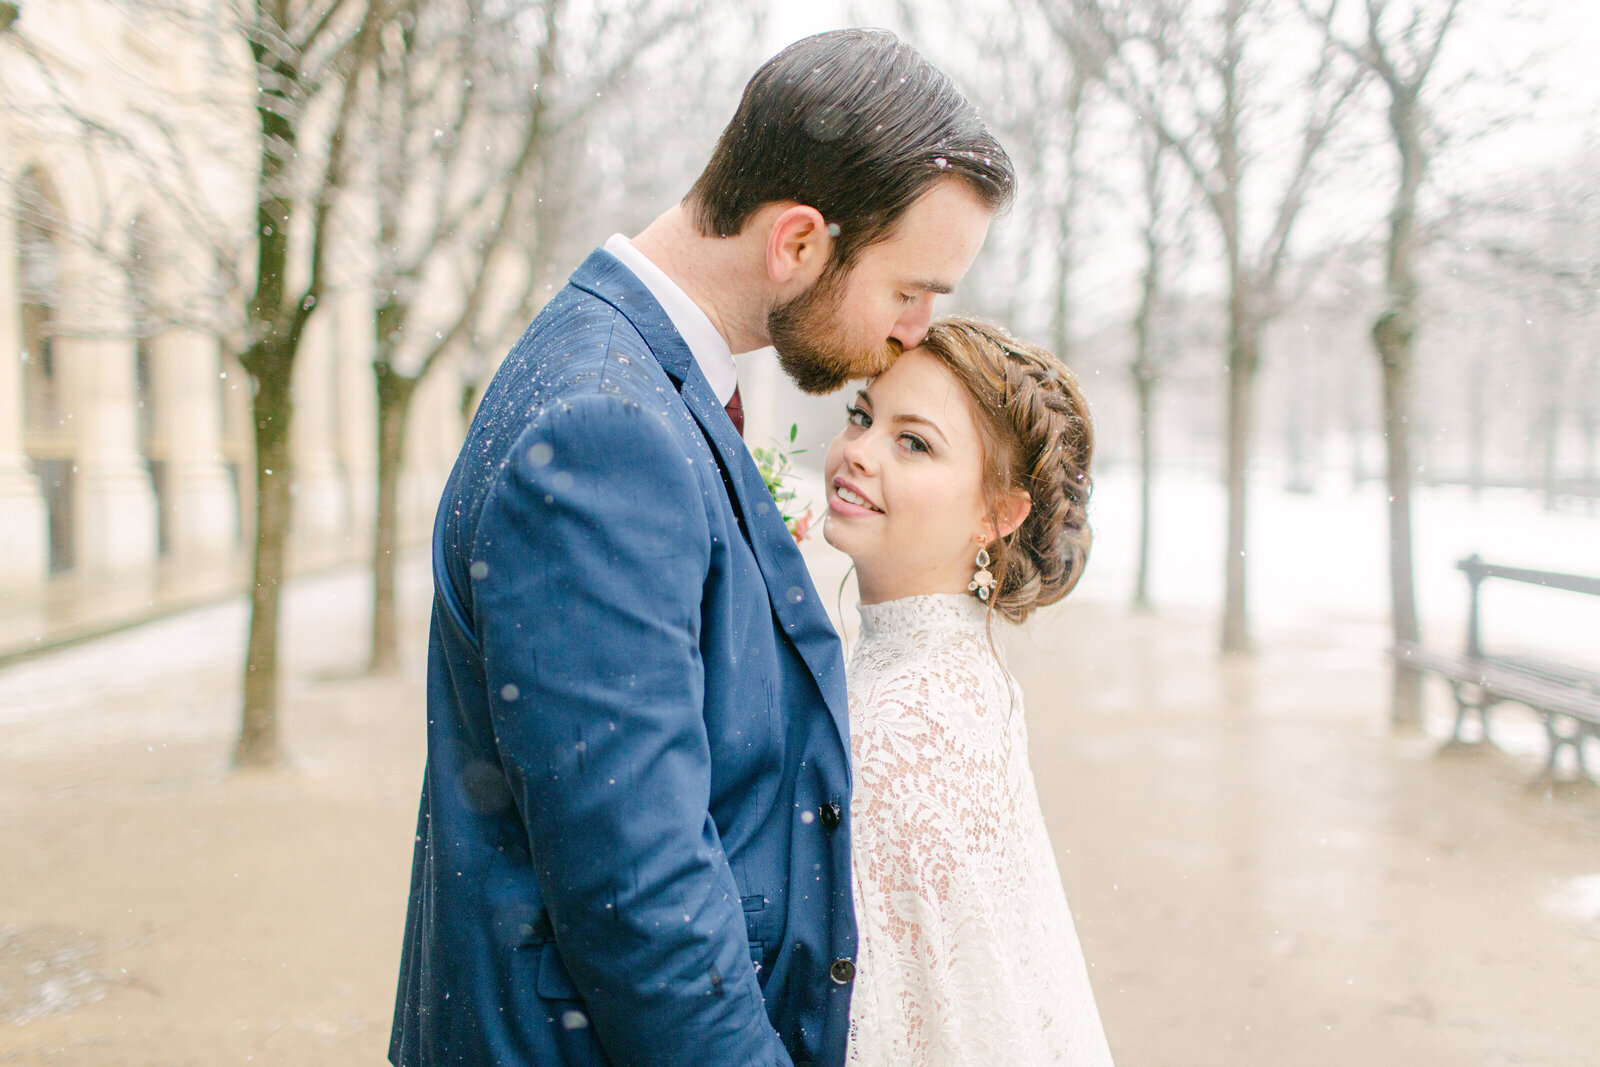 bride looking at camera as the groom kisses her forehead and snow falls around them